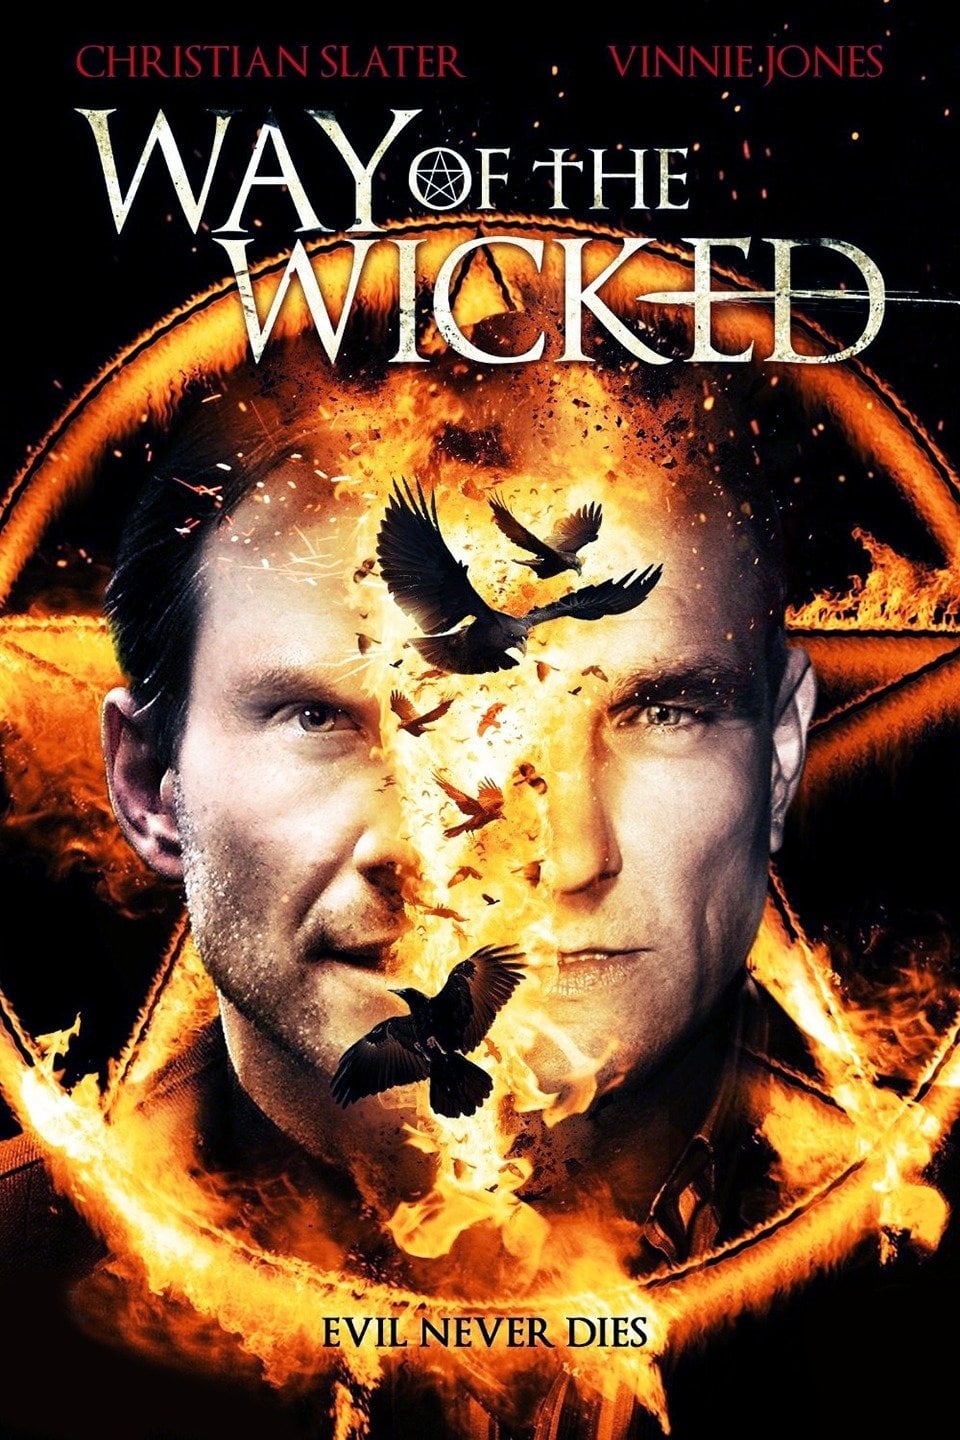 Way of the Wicked film